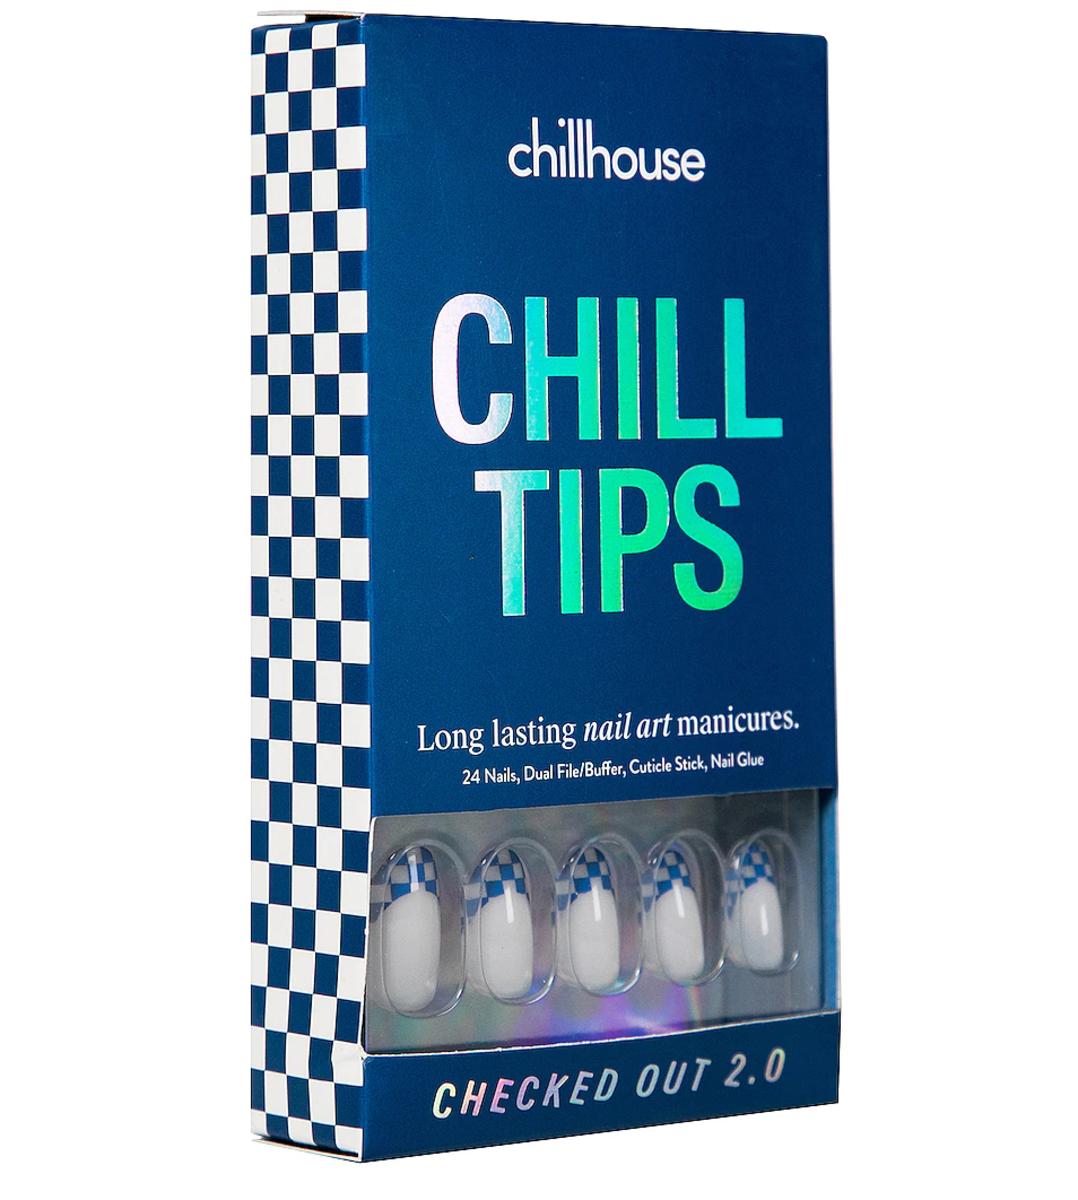 Chillhouse Chill Tips, $16, available here.